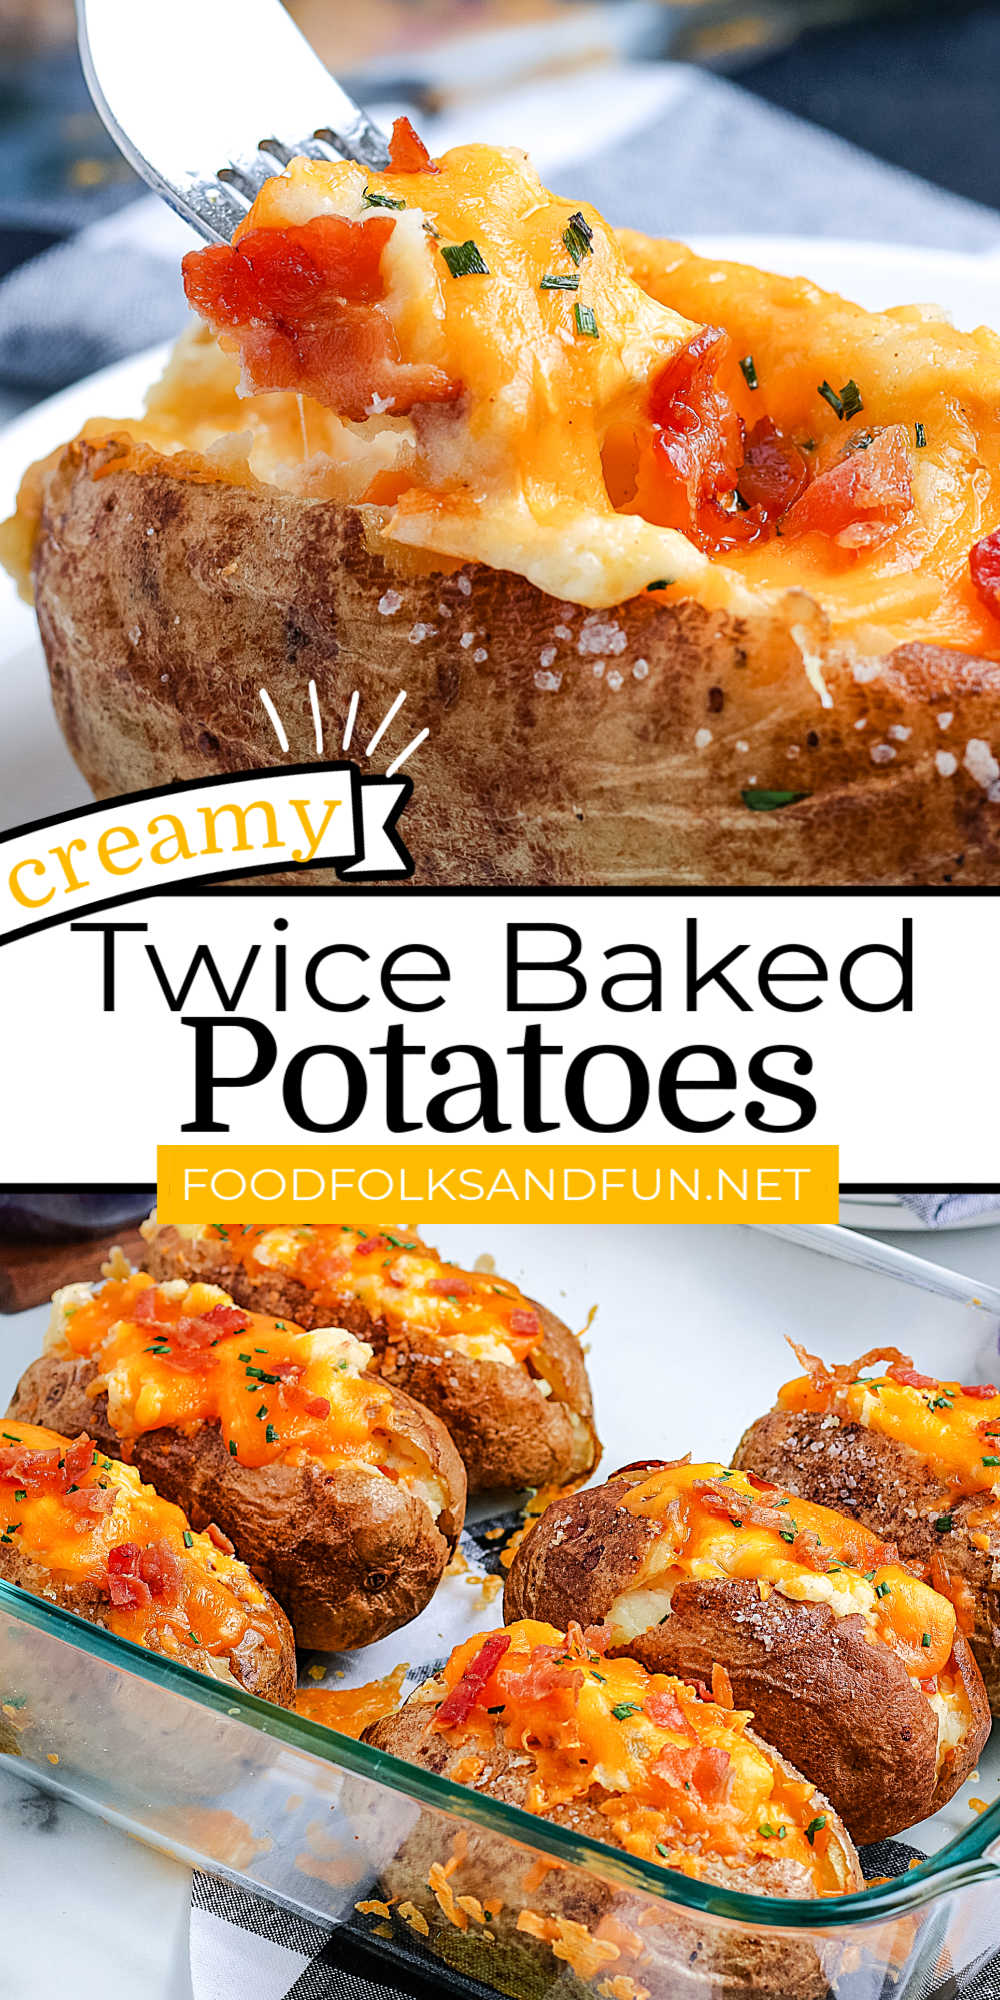 This Twice Baked Potatoes recipe is creamy, cheesy, and loaded with bacon, sour cream, and chives. They’re the ultimate comfort food side dish. via @foodfolksandfun